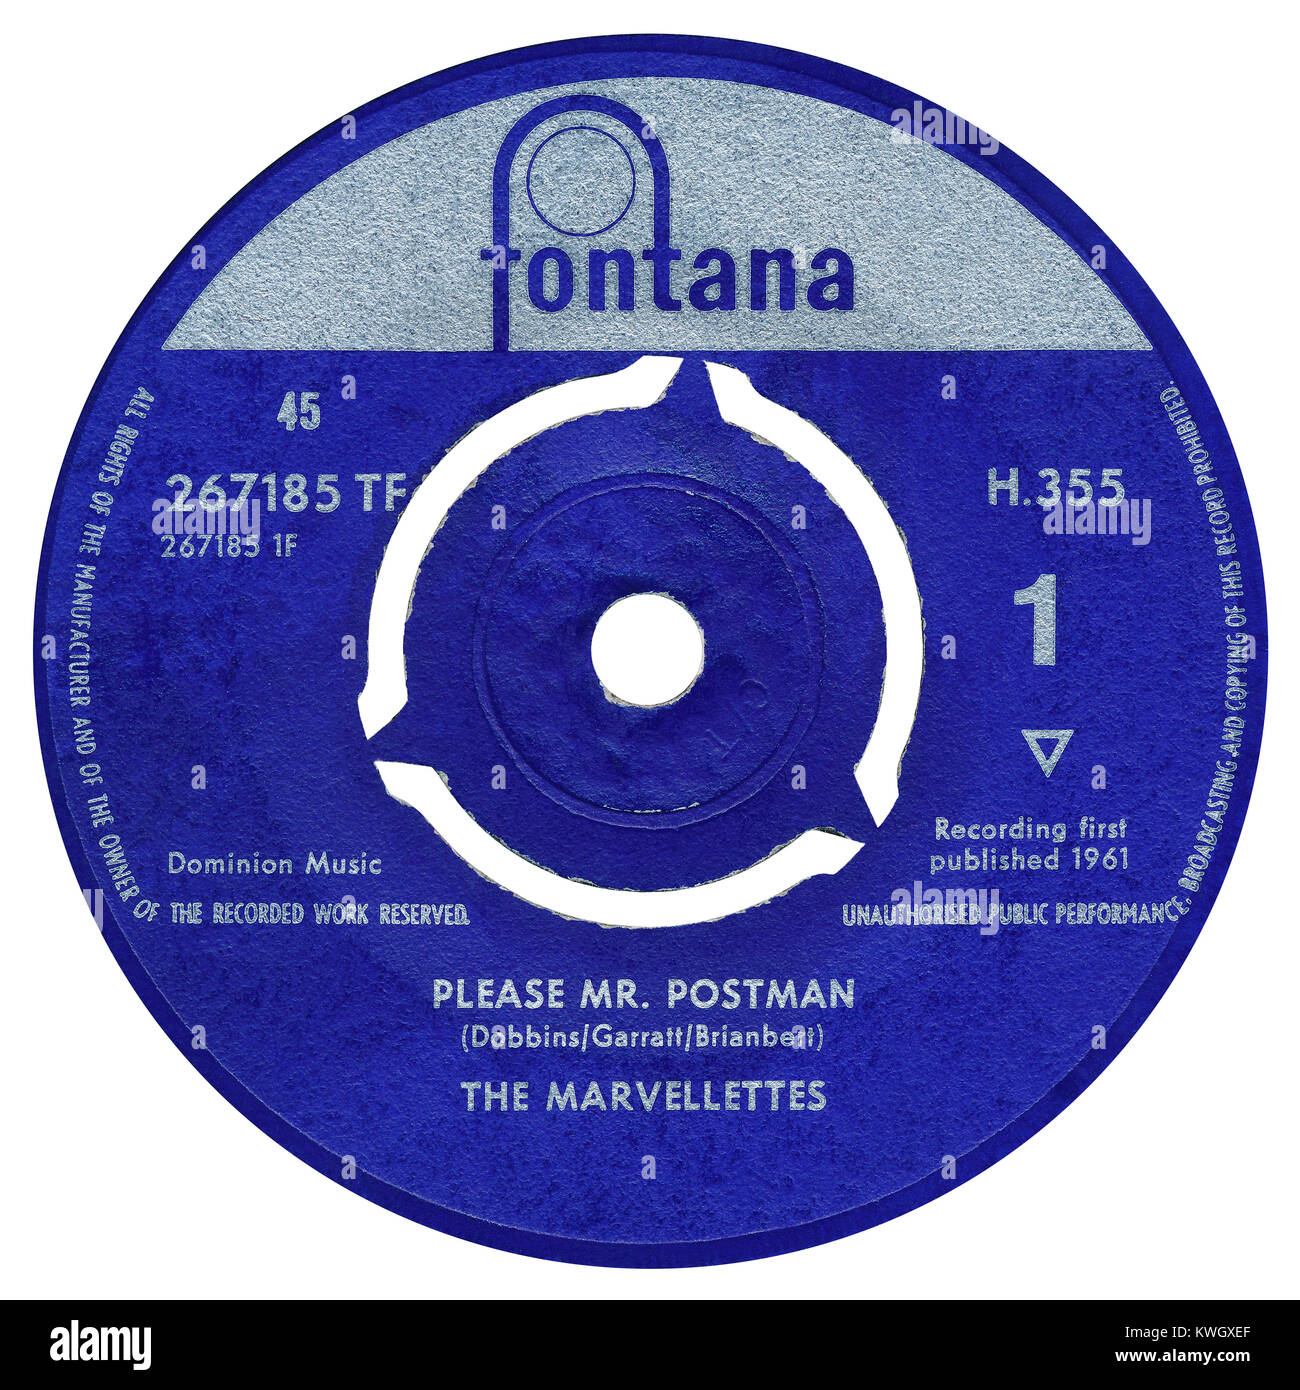 45 RPM 7' UK record label of Please Mr. Postman by The Marvelettes. Written by Georgia Dobbins, William Garrett and Brian Holland and Roger Bateman as Brianbert. Recorded in the USA by Motown and released in the UK in December 1961 on Fontana Records. Stock Photo